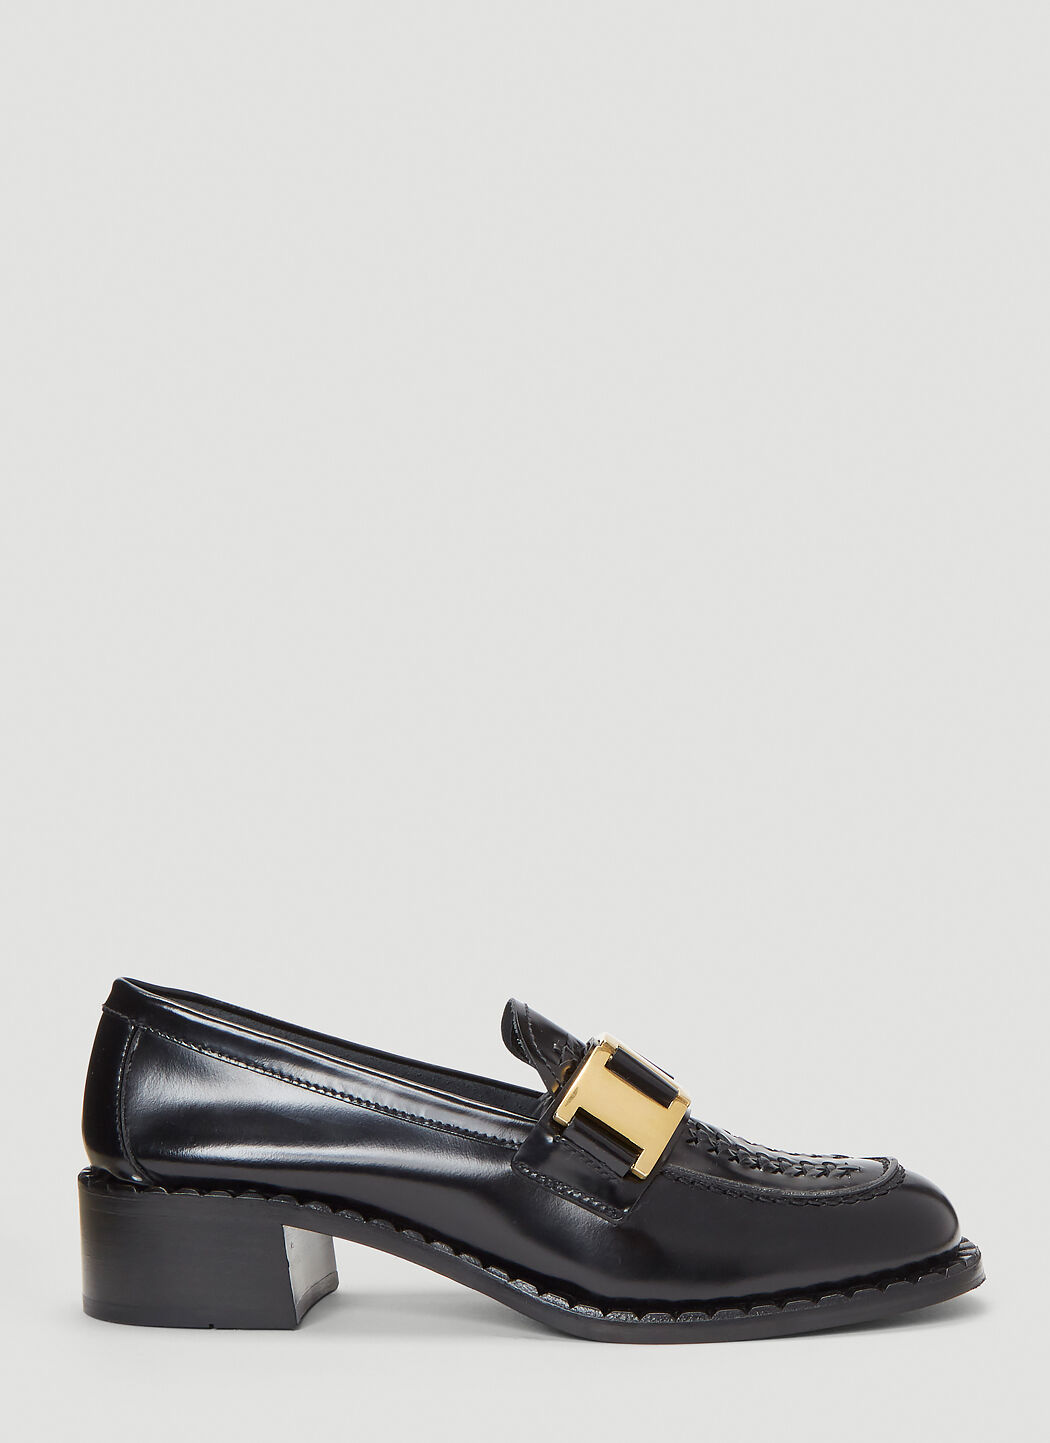 Alexander Wang Buckle Moccasin Shoes Black awg0255043